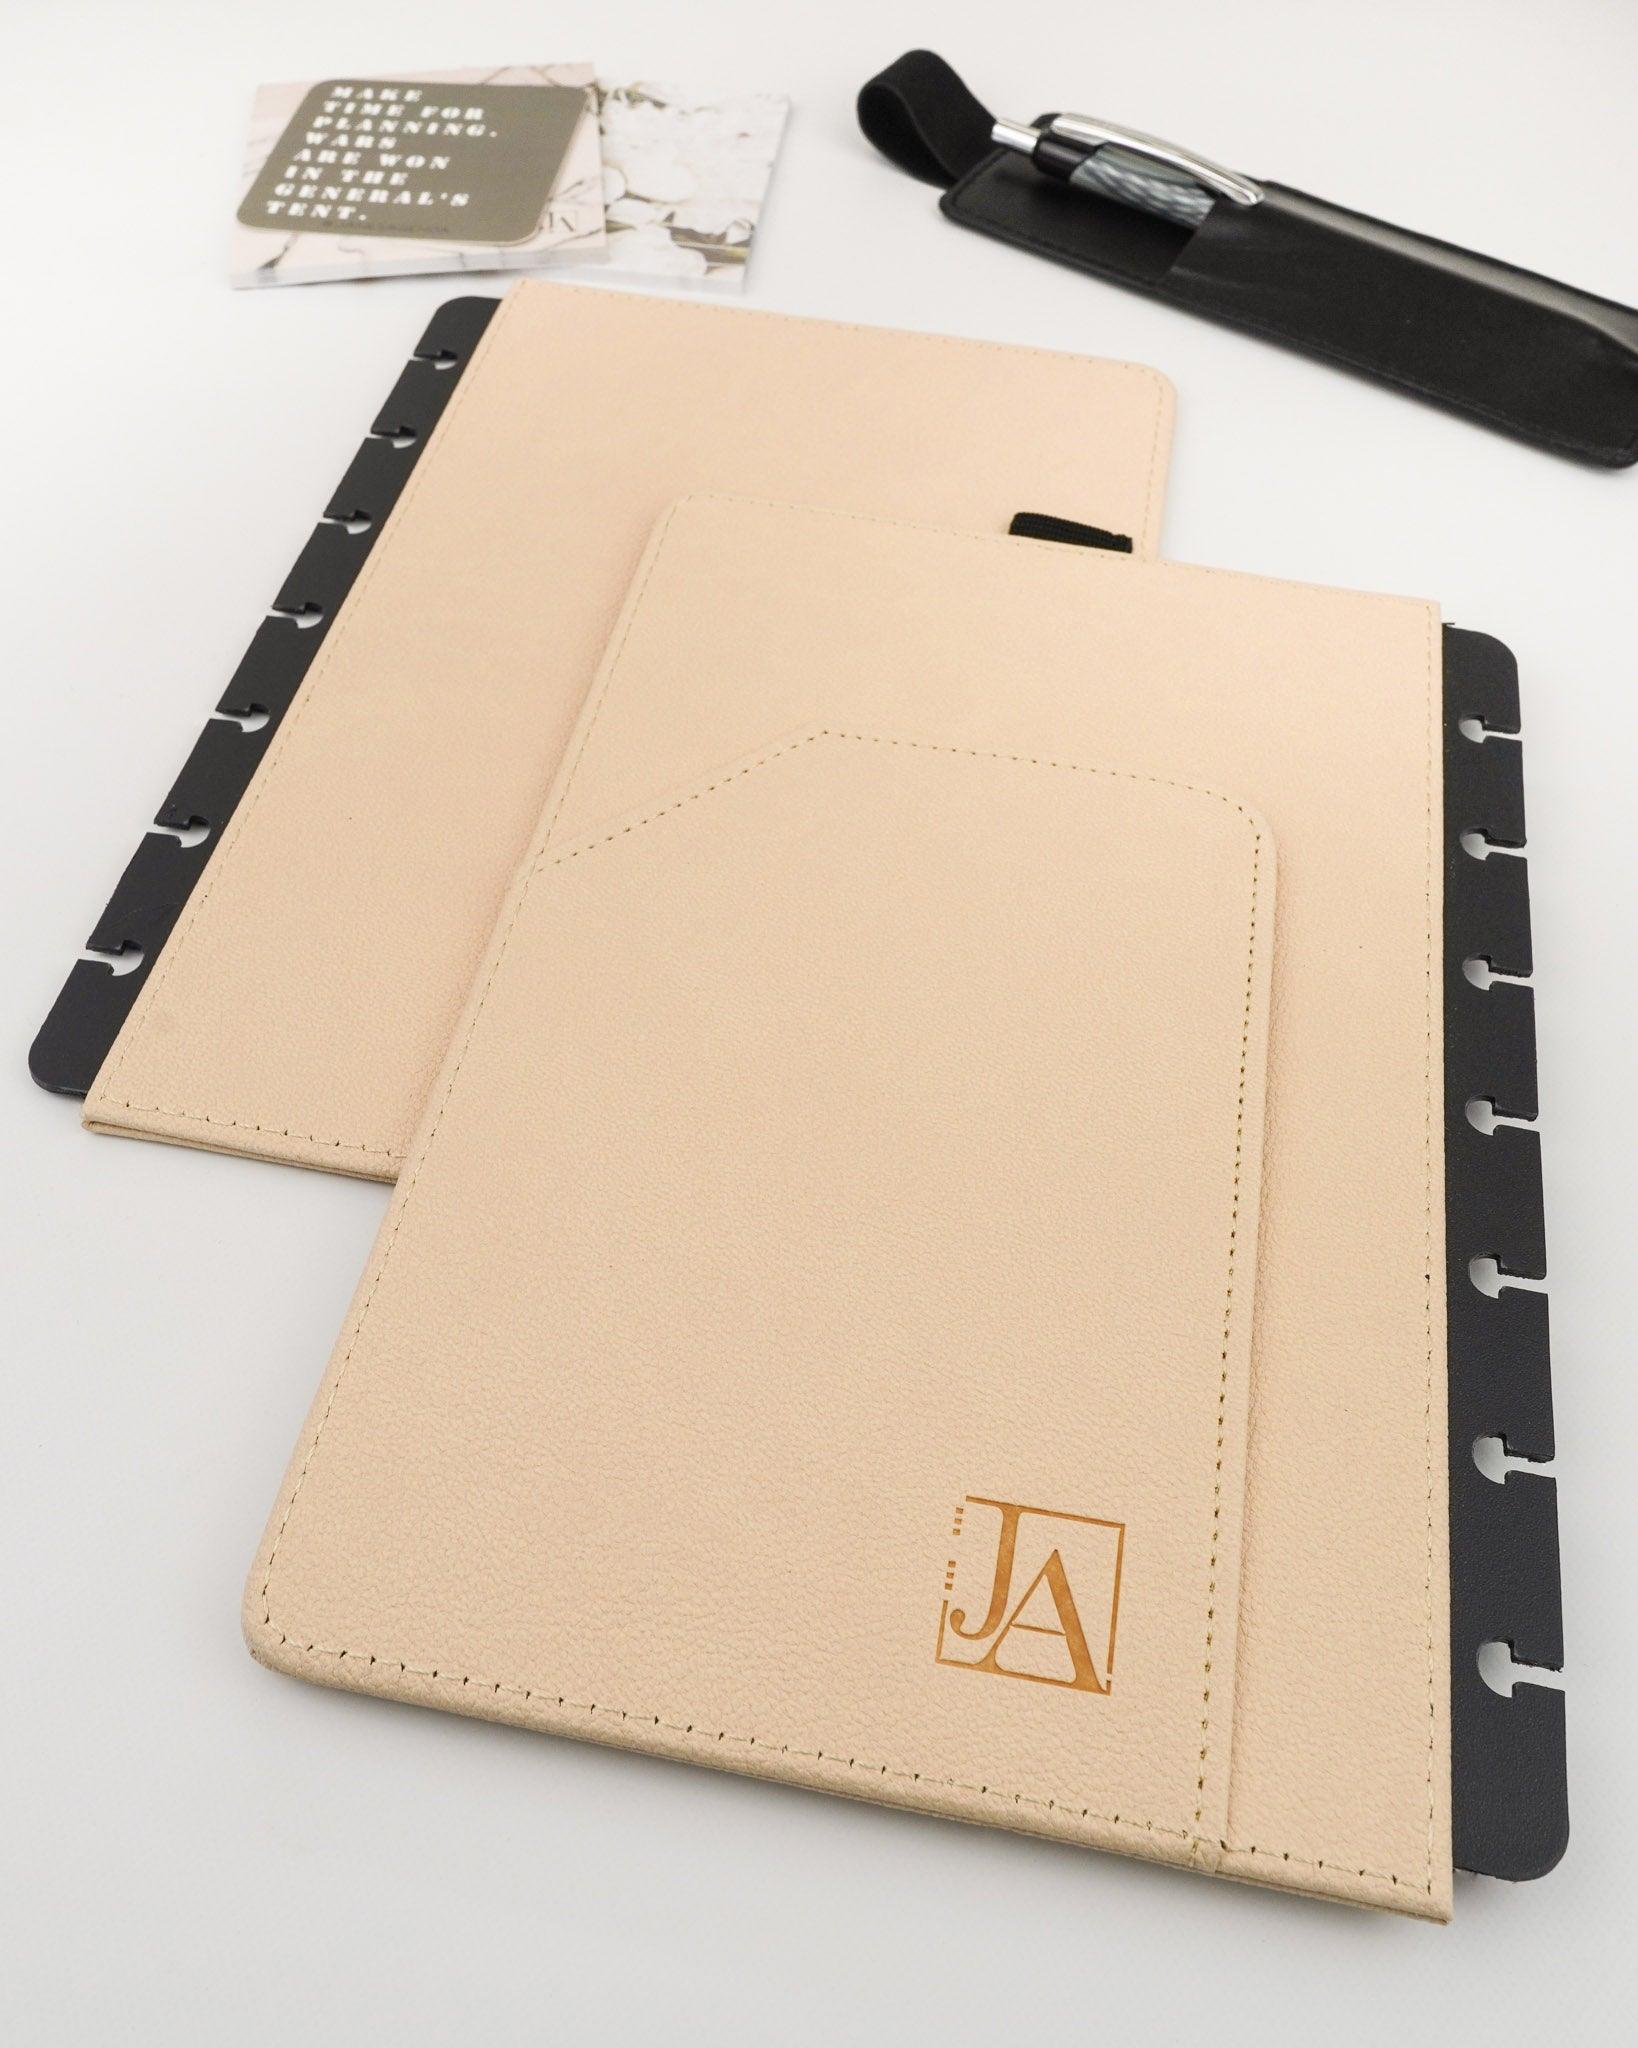 Premium vegan leather planner covers for discbound planner systems by Jane's Agenda.